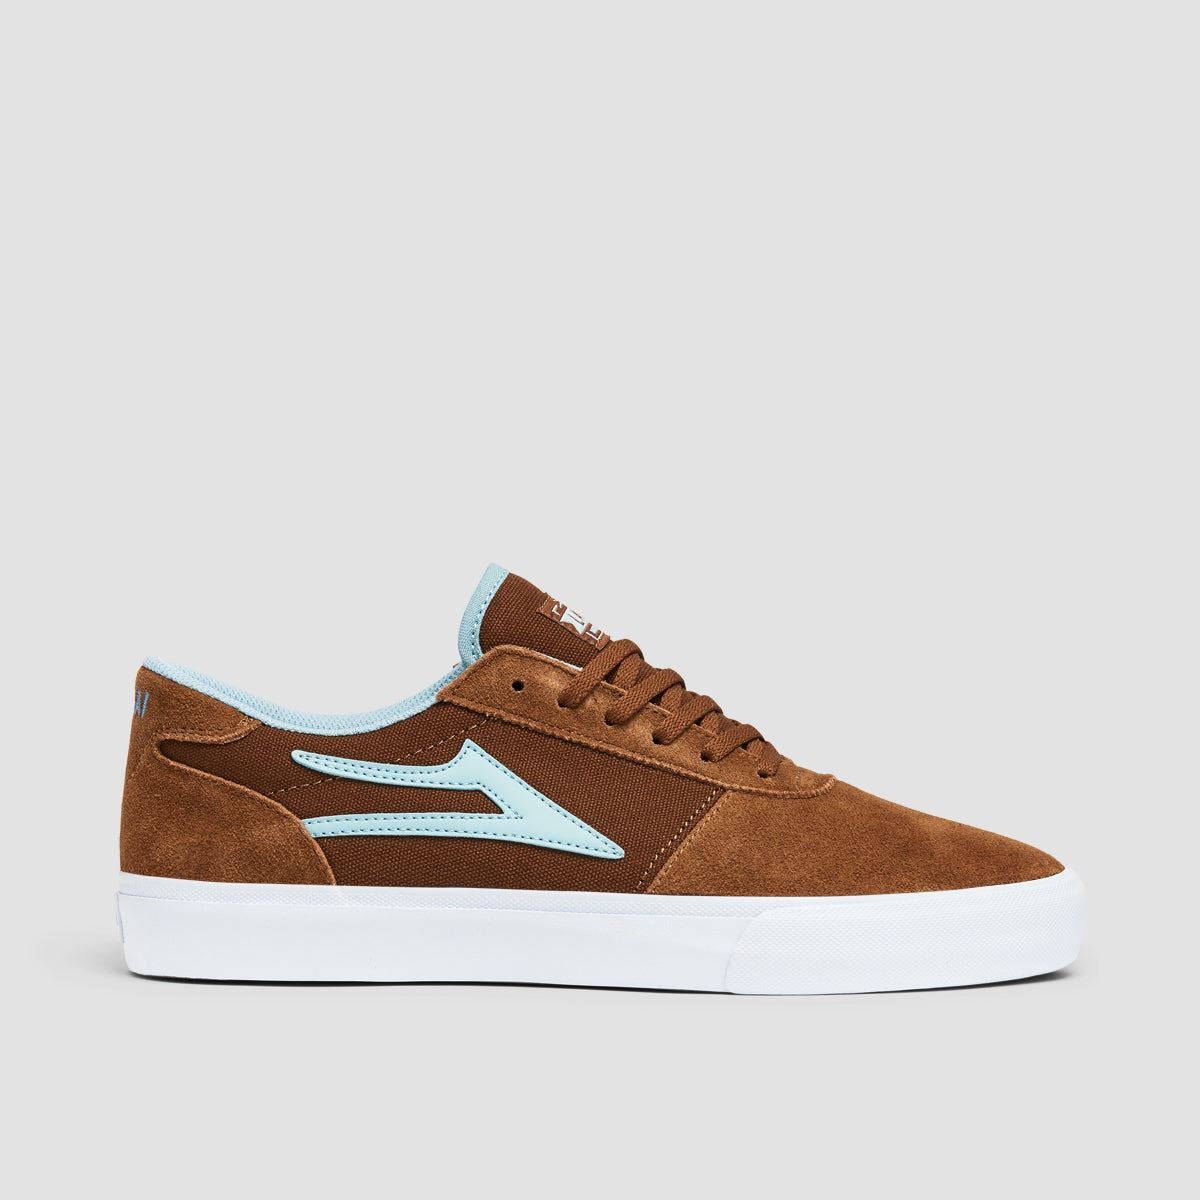 Lakai Manchester Shoes - Brown Suede